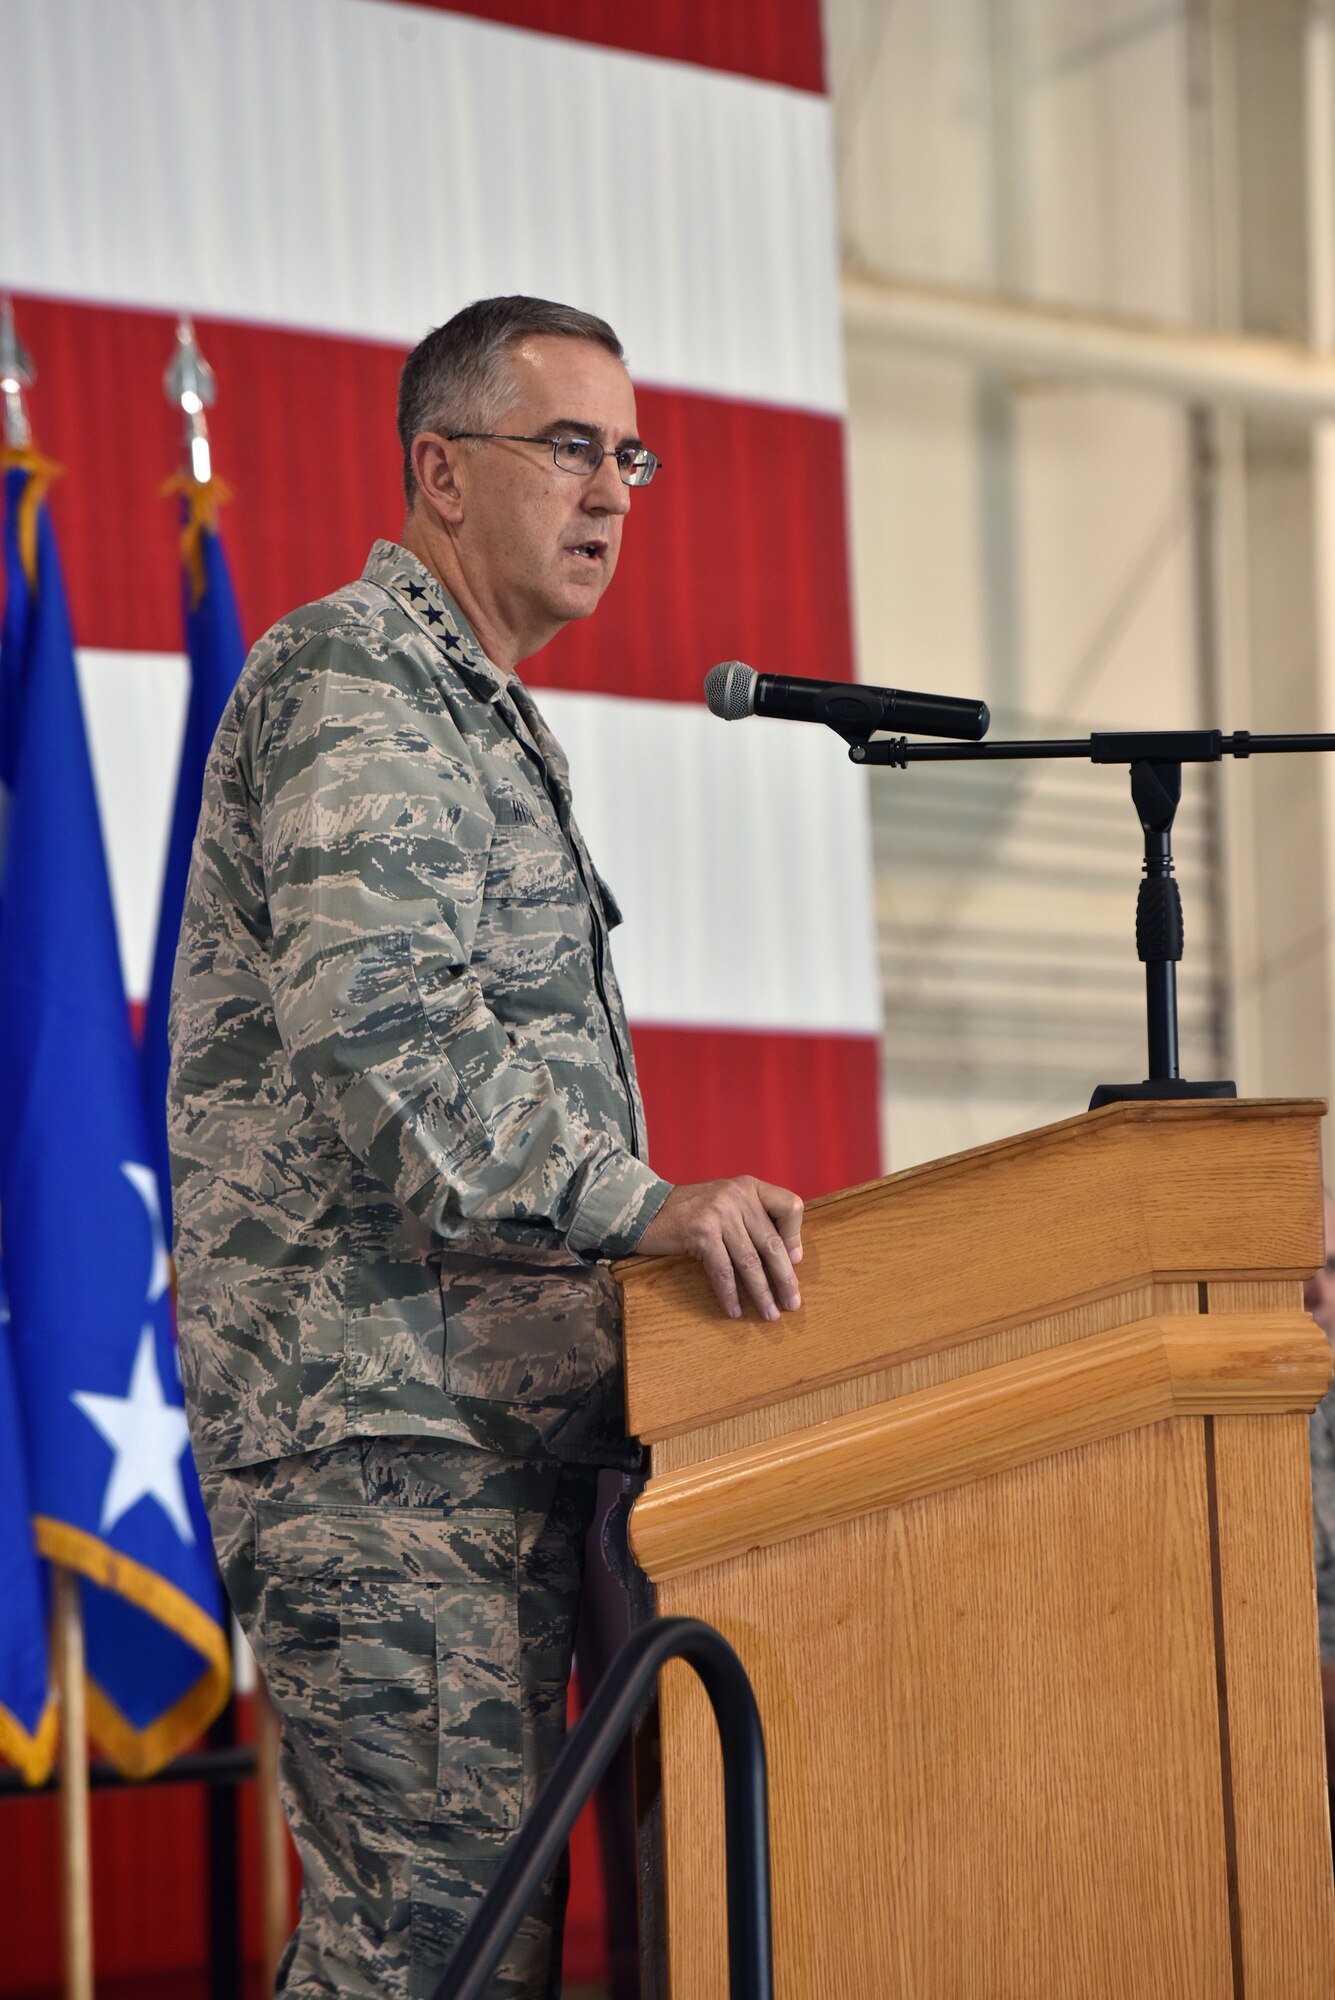 U.S. Air Force Gen. John Hyten, commander of U.S. Strategic Command, gives remarks during the Omaha Trophy award ceremony at Whiteman Air Force Base, Mo., May 8, 2018. The Omaha Trophy was presented to the 509th Bomb Wing and 131st Bomb Wing by Hyten and a member of the Strategic Command Council. (U.S. Air Force photos by Senior Airman Jovan Banks)